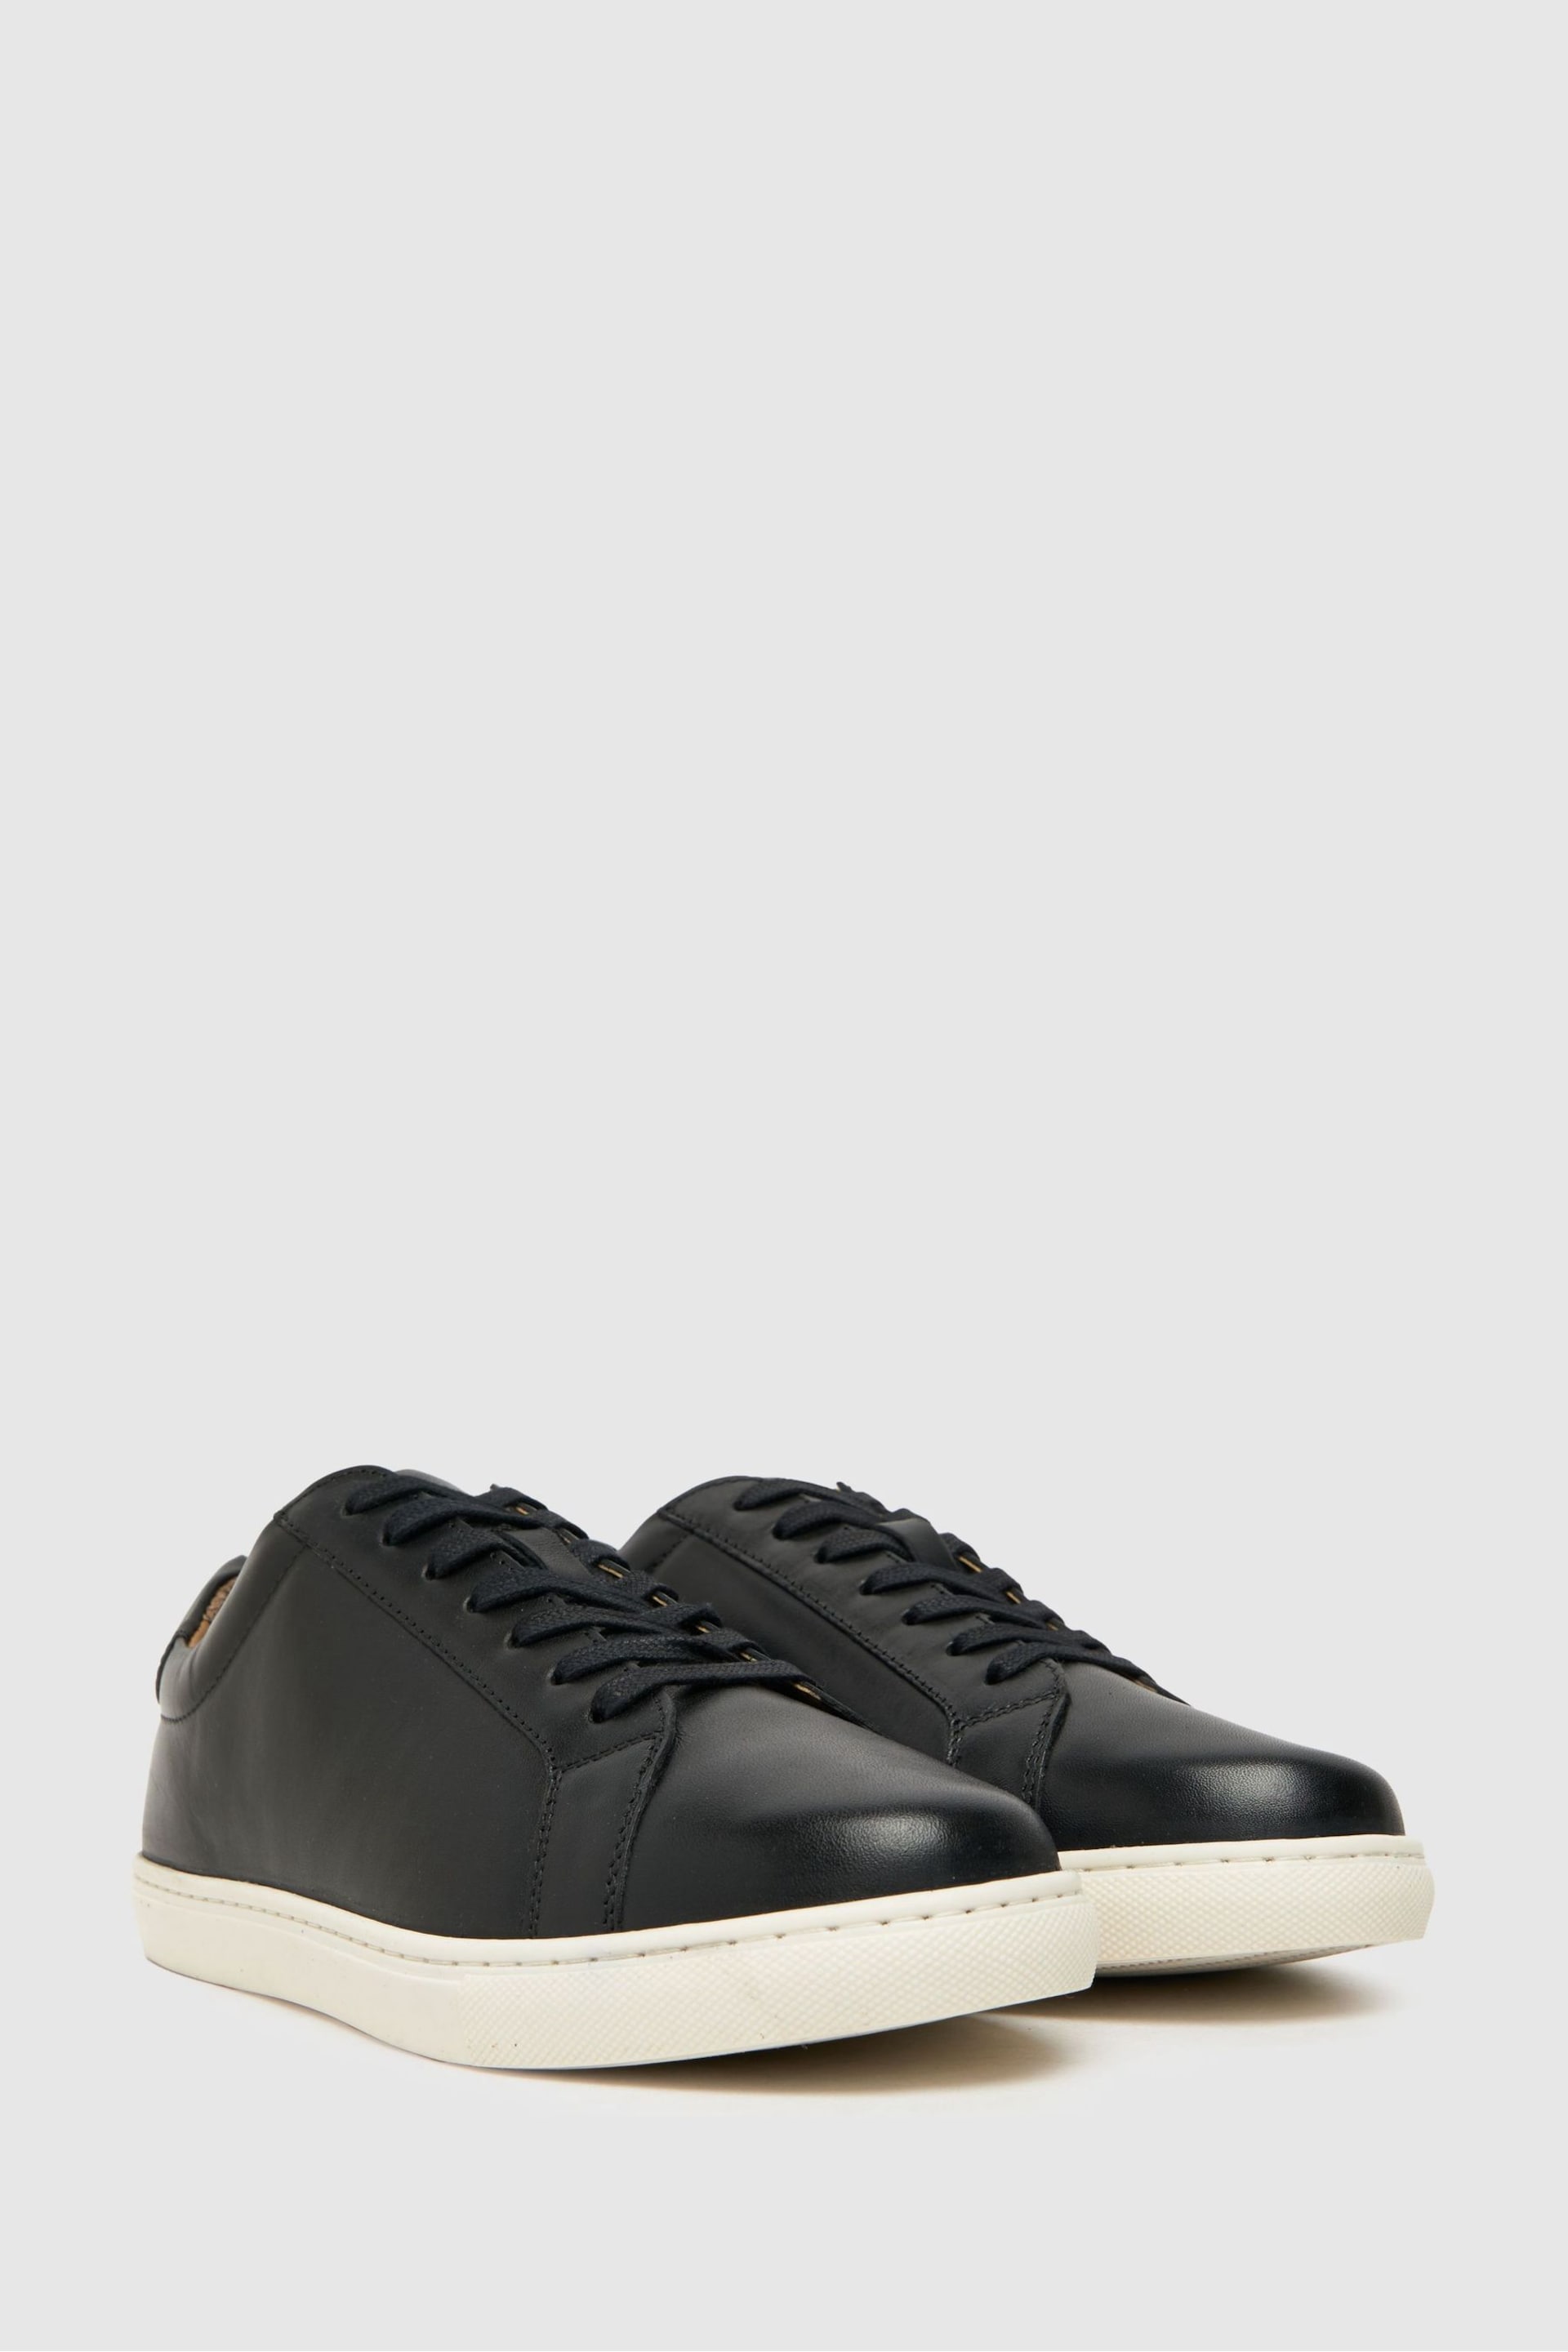 Schuh Wayne Leather Trainers - Image 2 of 4